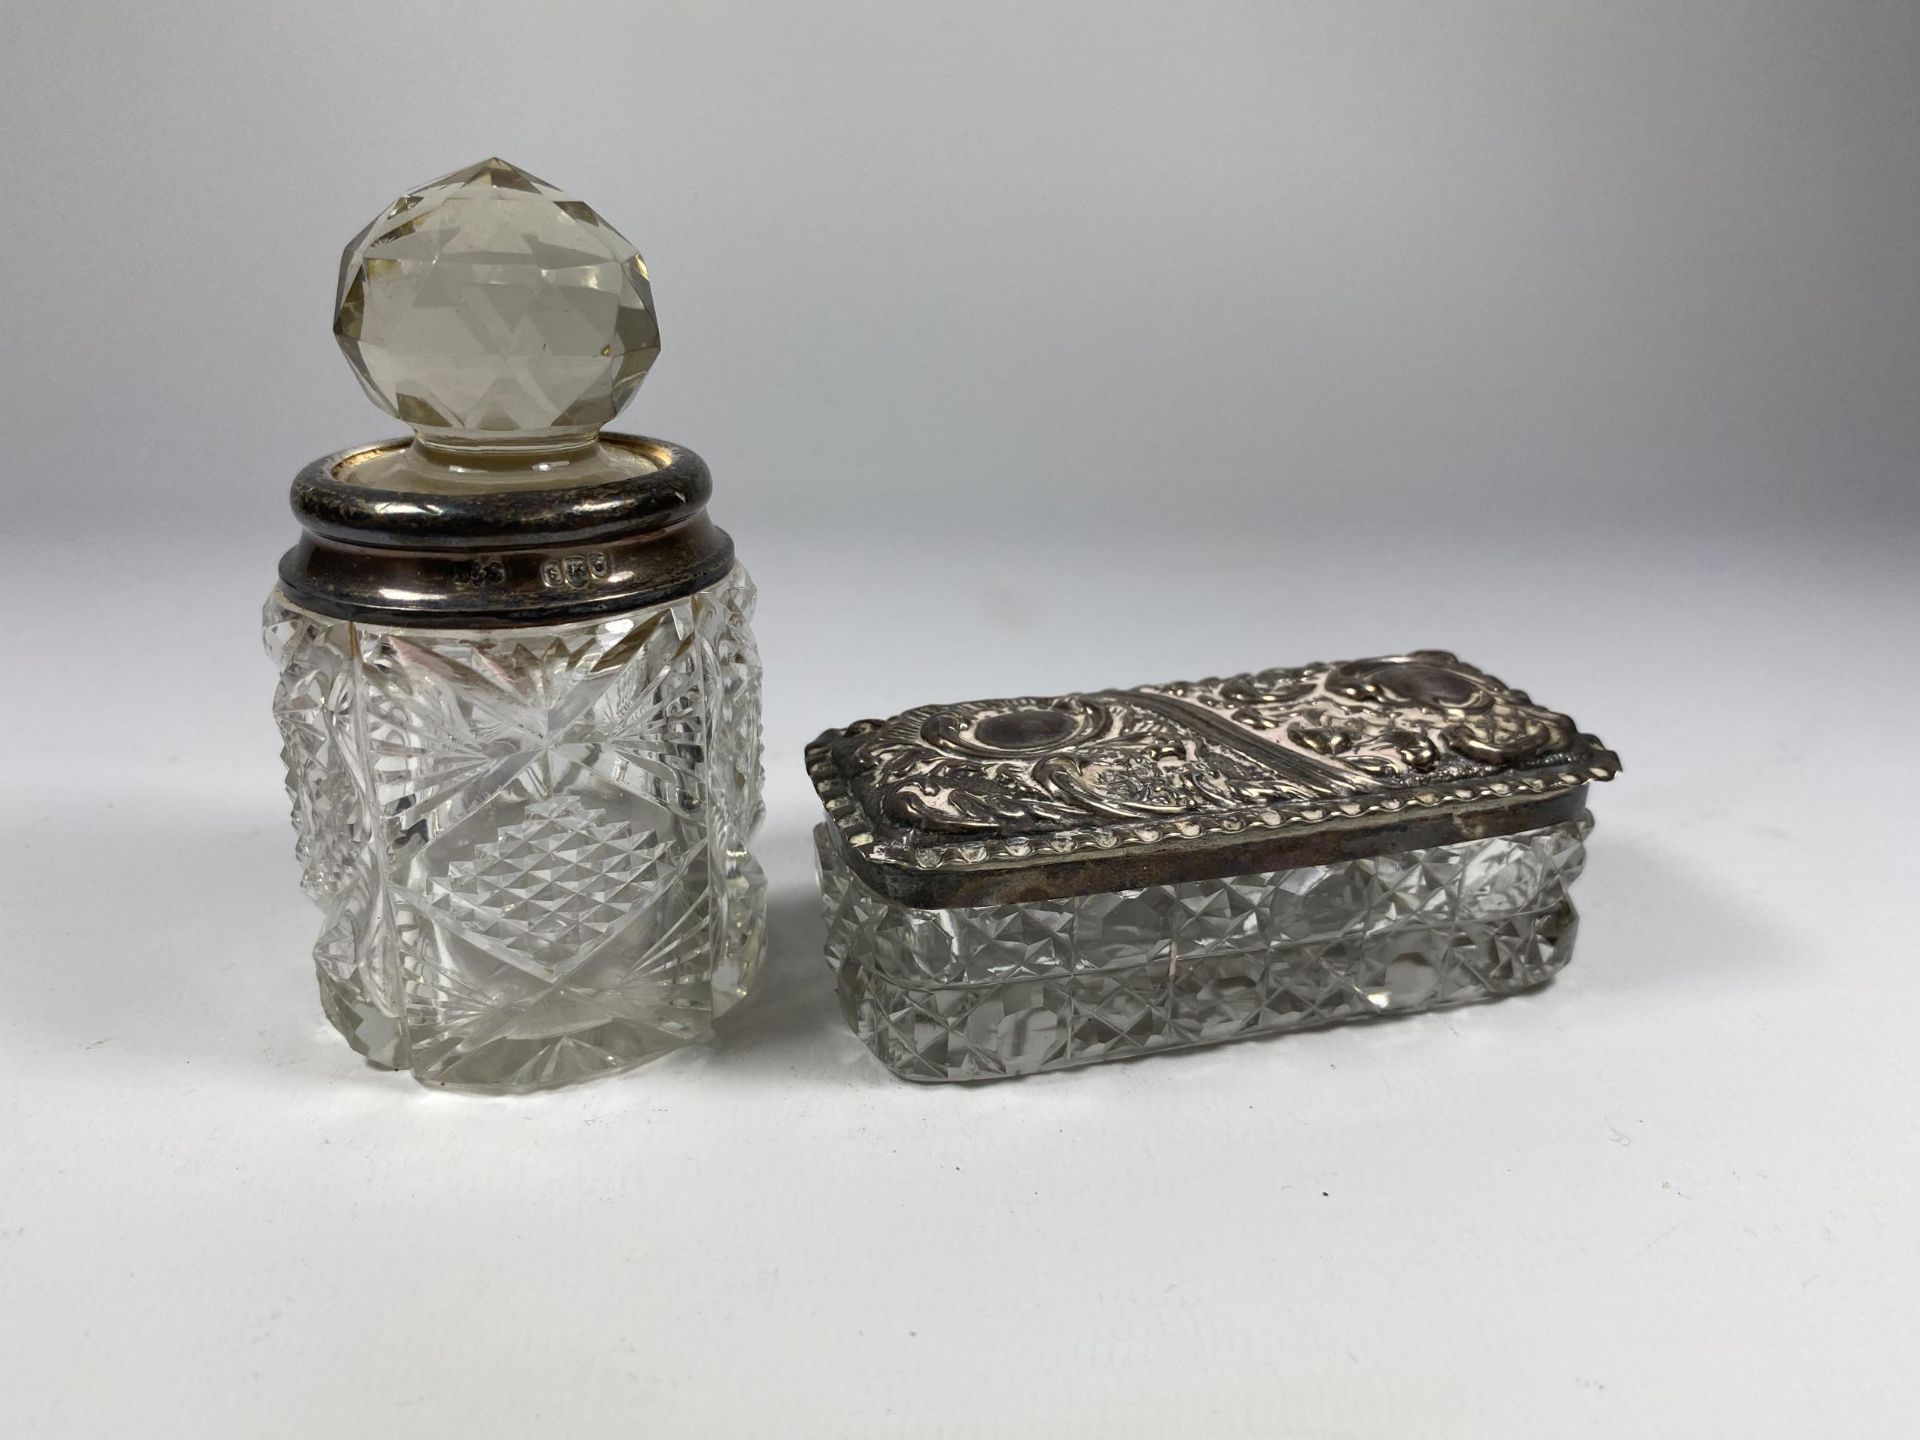 TWO HALLMARKED SILVER AND CUT GLASS DRESSING TABLE ITEMS - PERFUME BOTTLE & TRINKET BOX